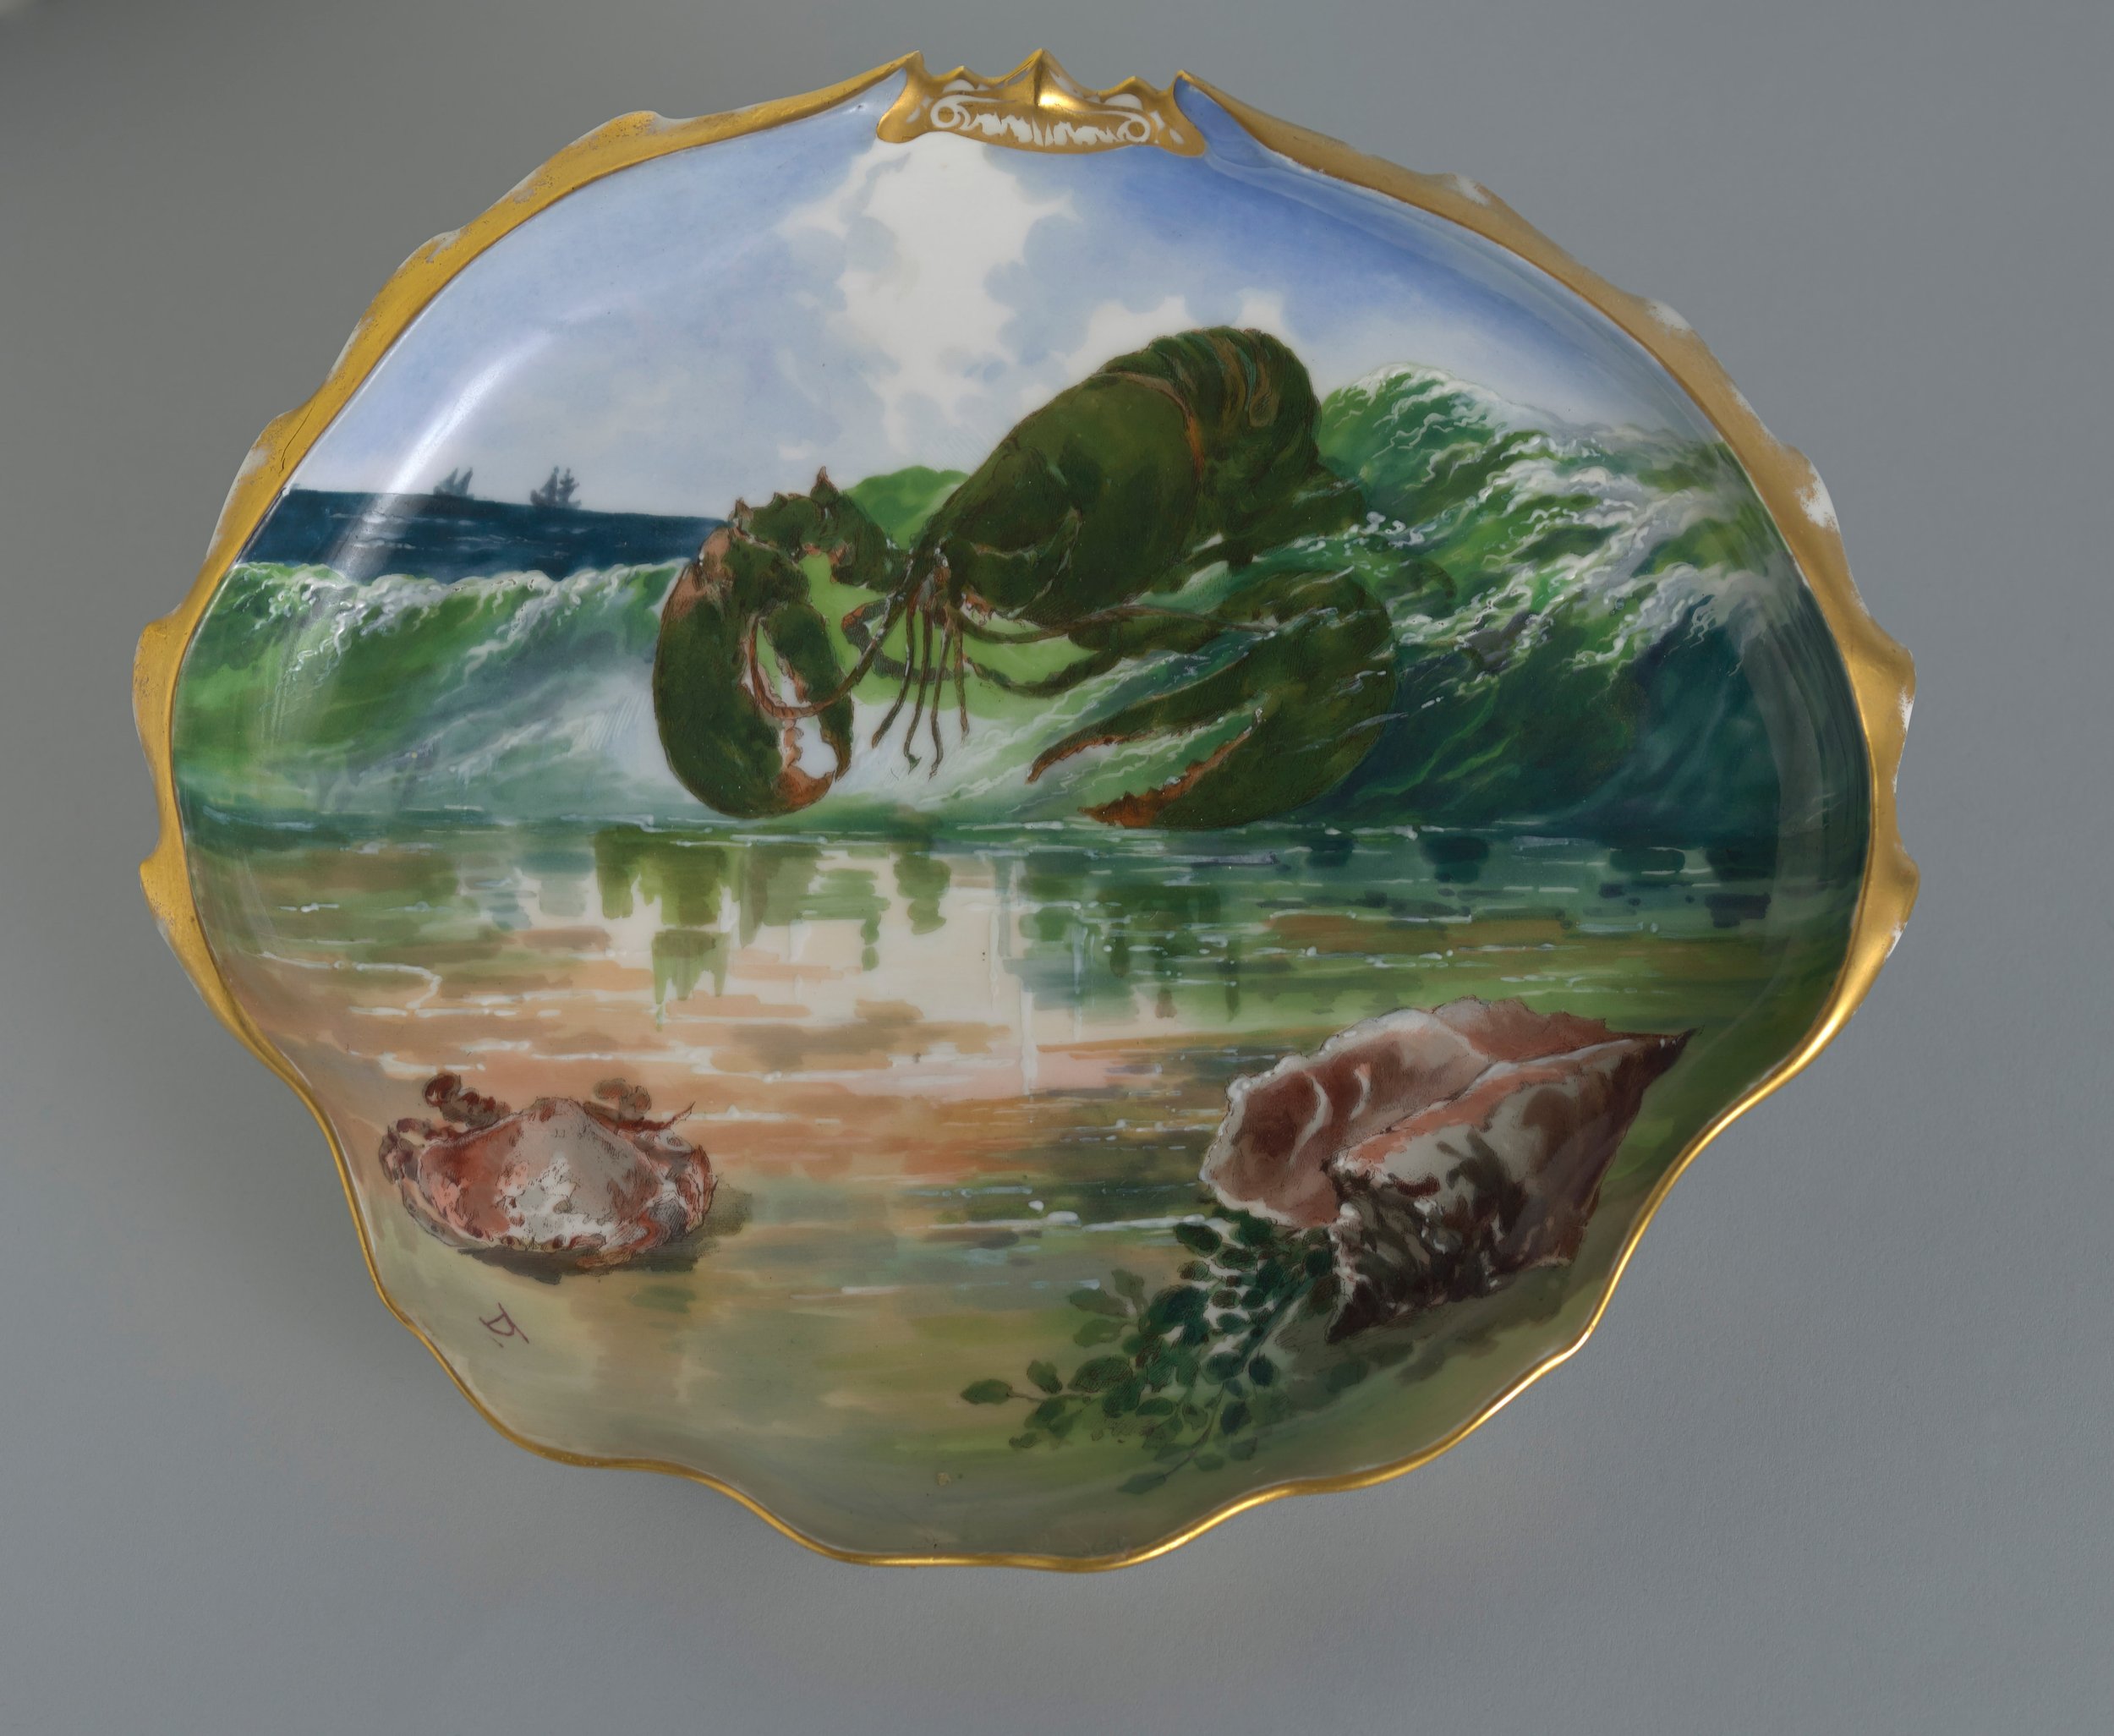   Theodore Davis  United States, 1840–1894  Seafood Salad Plate , 1880 porcelain with transfer-printed, enameled and gilded decoration, 1 1/2 x 9 x 7 1/2 inches Gift of Christopher Monkhouse in honor of Marjorie Linder Monkhouse, 2004.43 